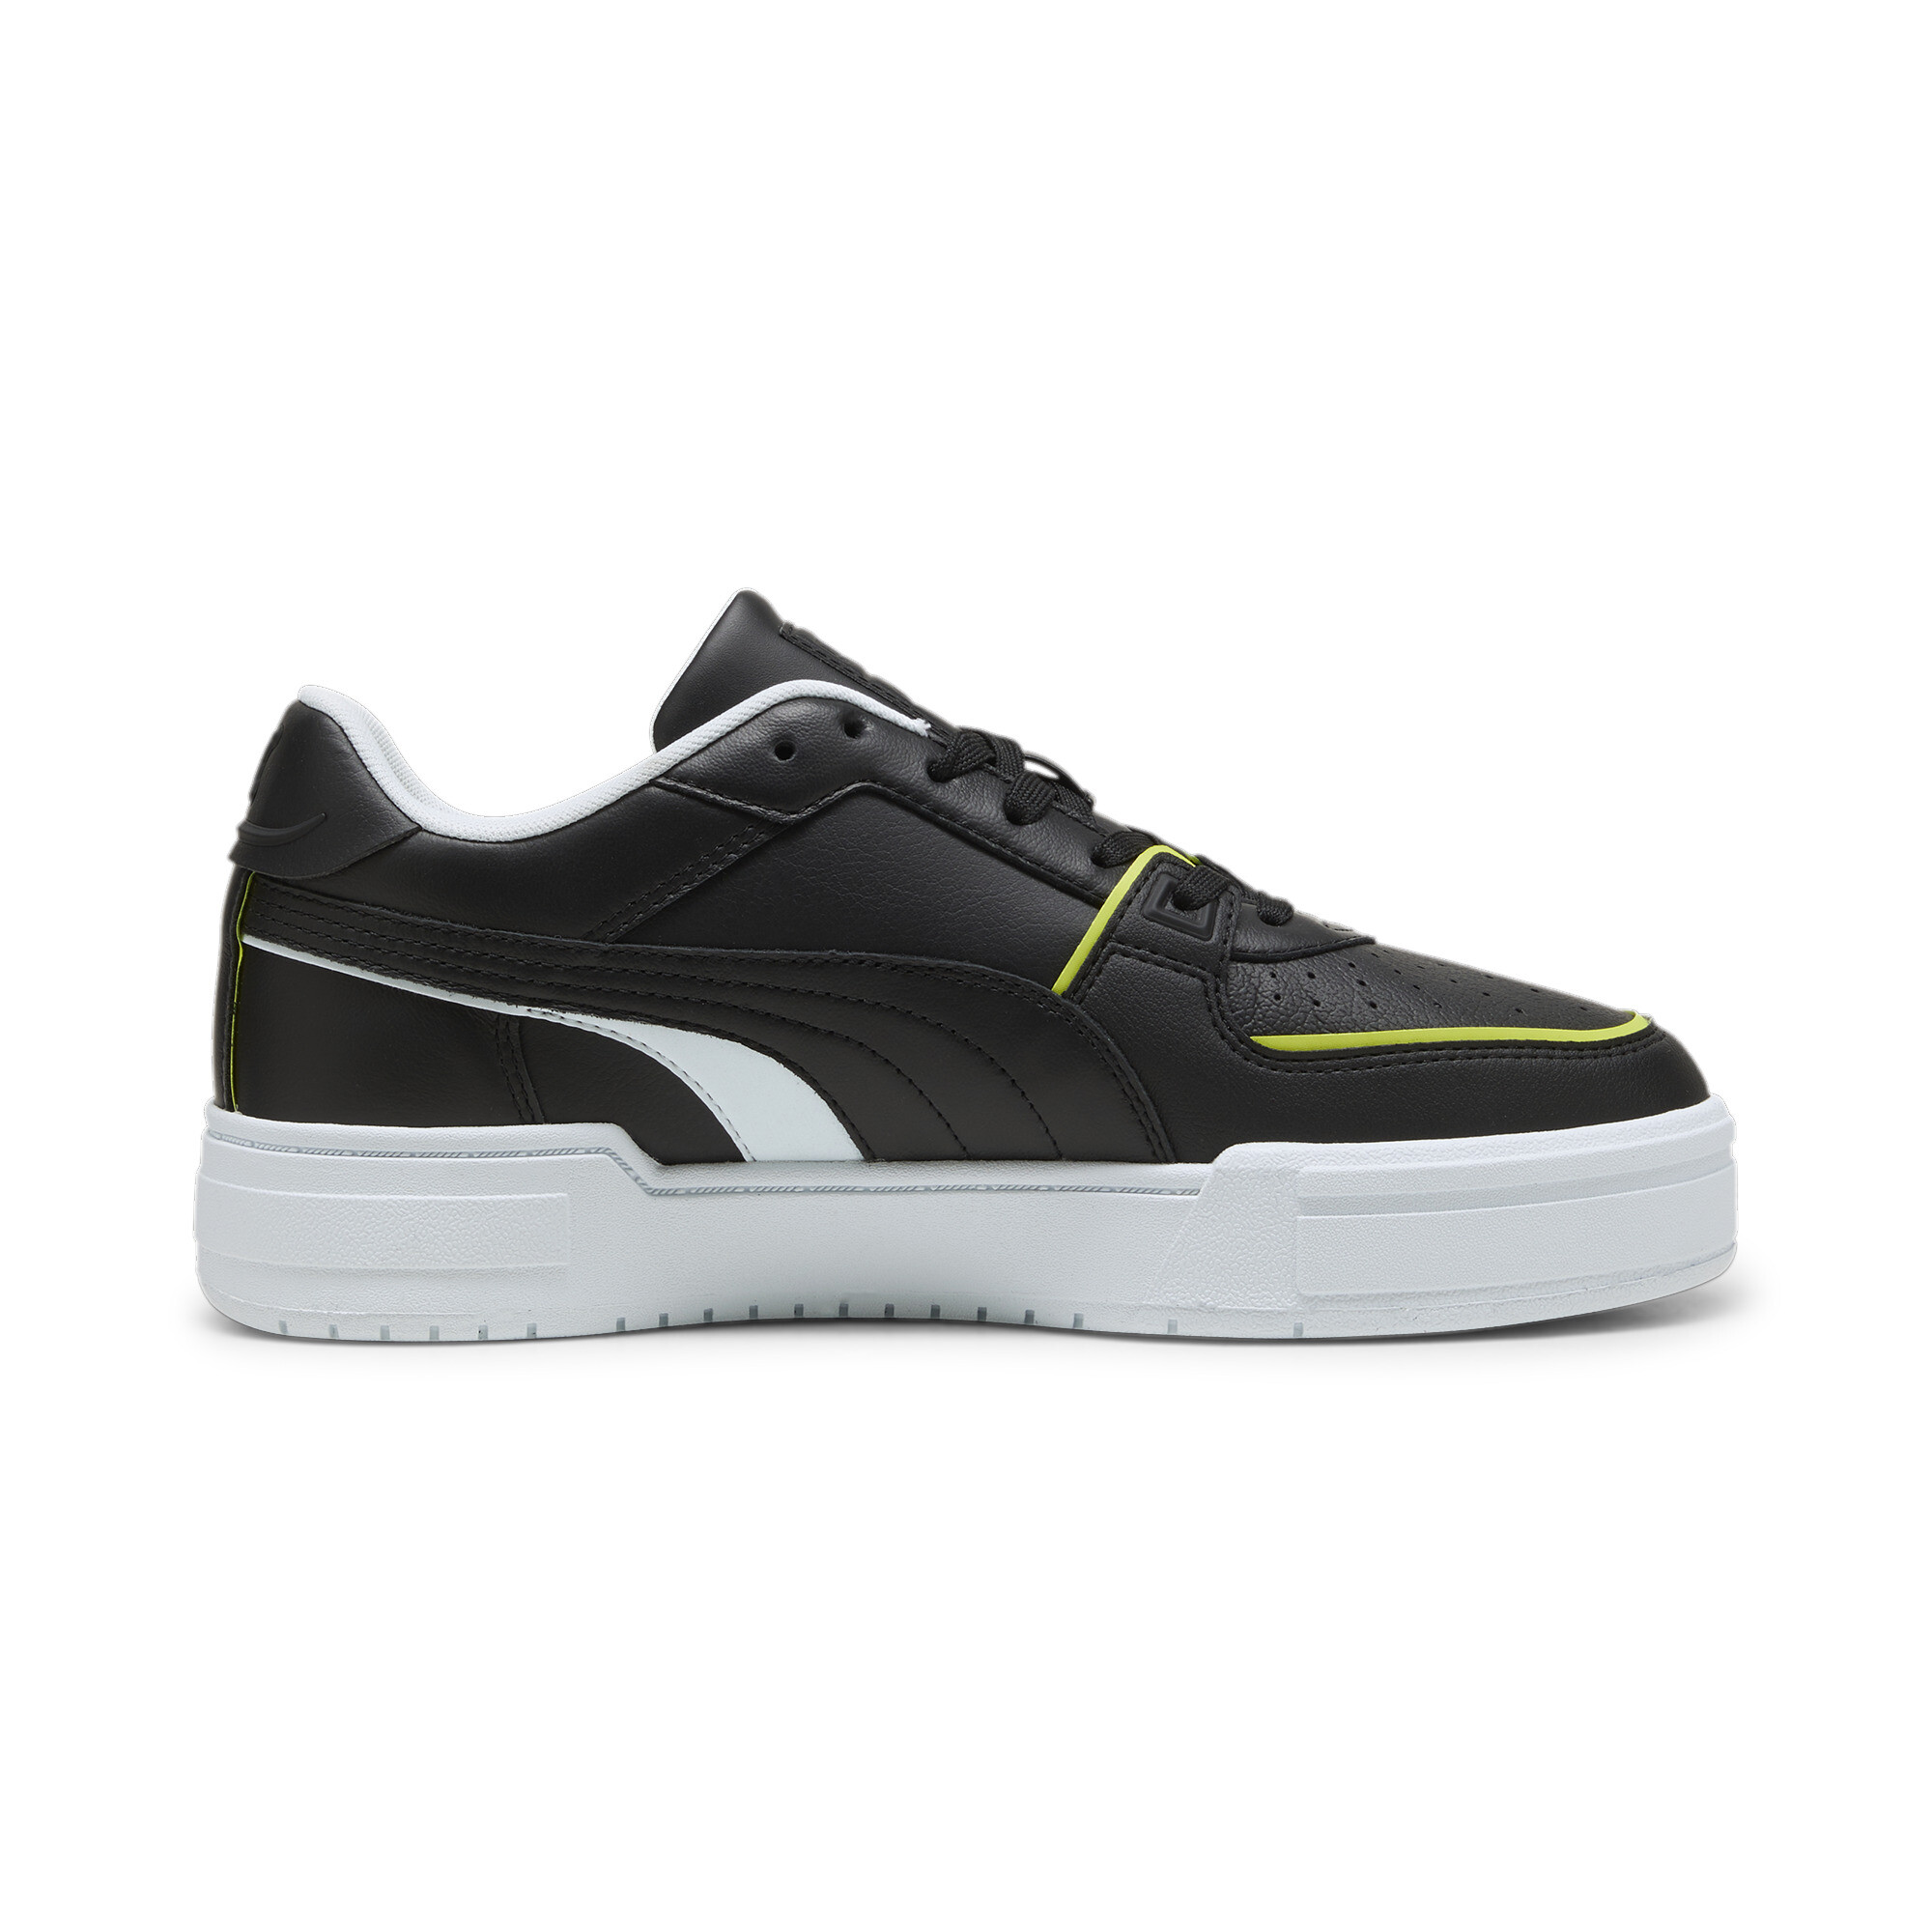 Puma AMG CA Pro Sneakers, Black, Size 46, Shoes